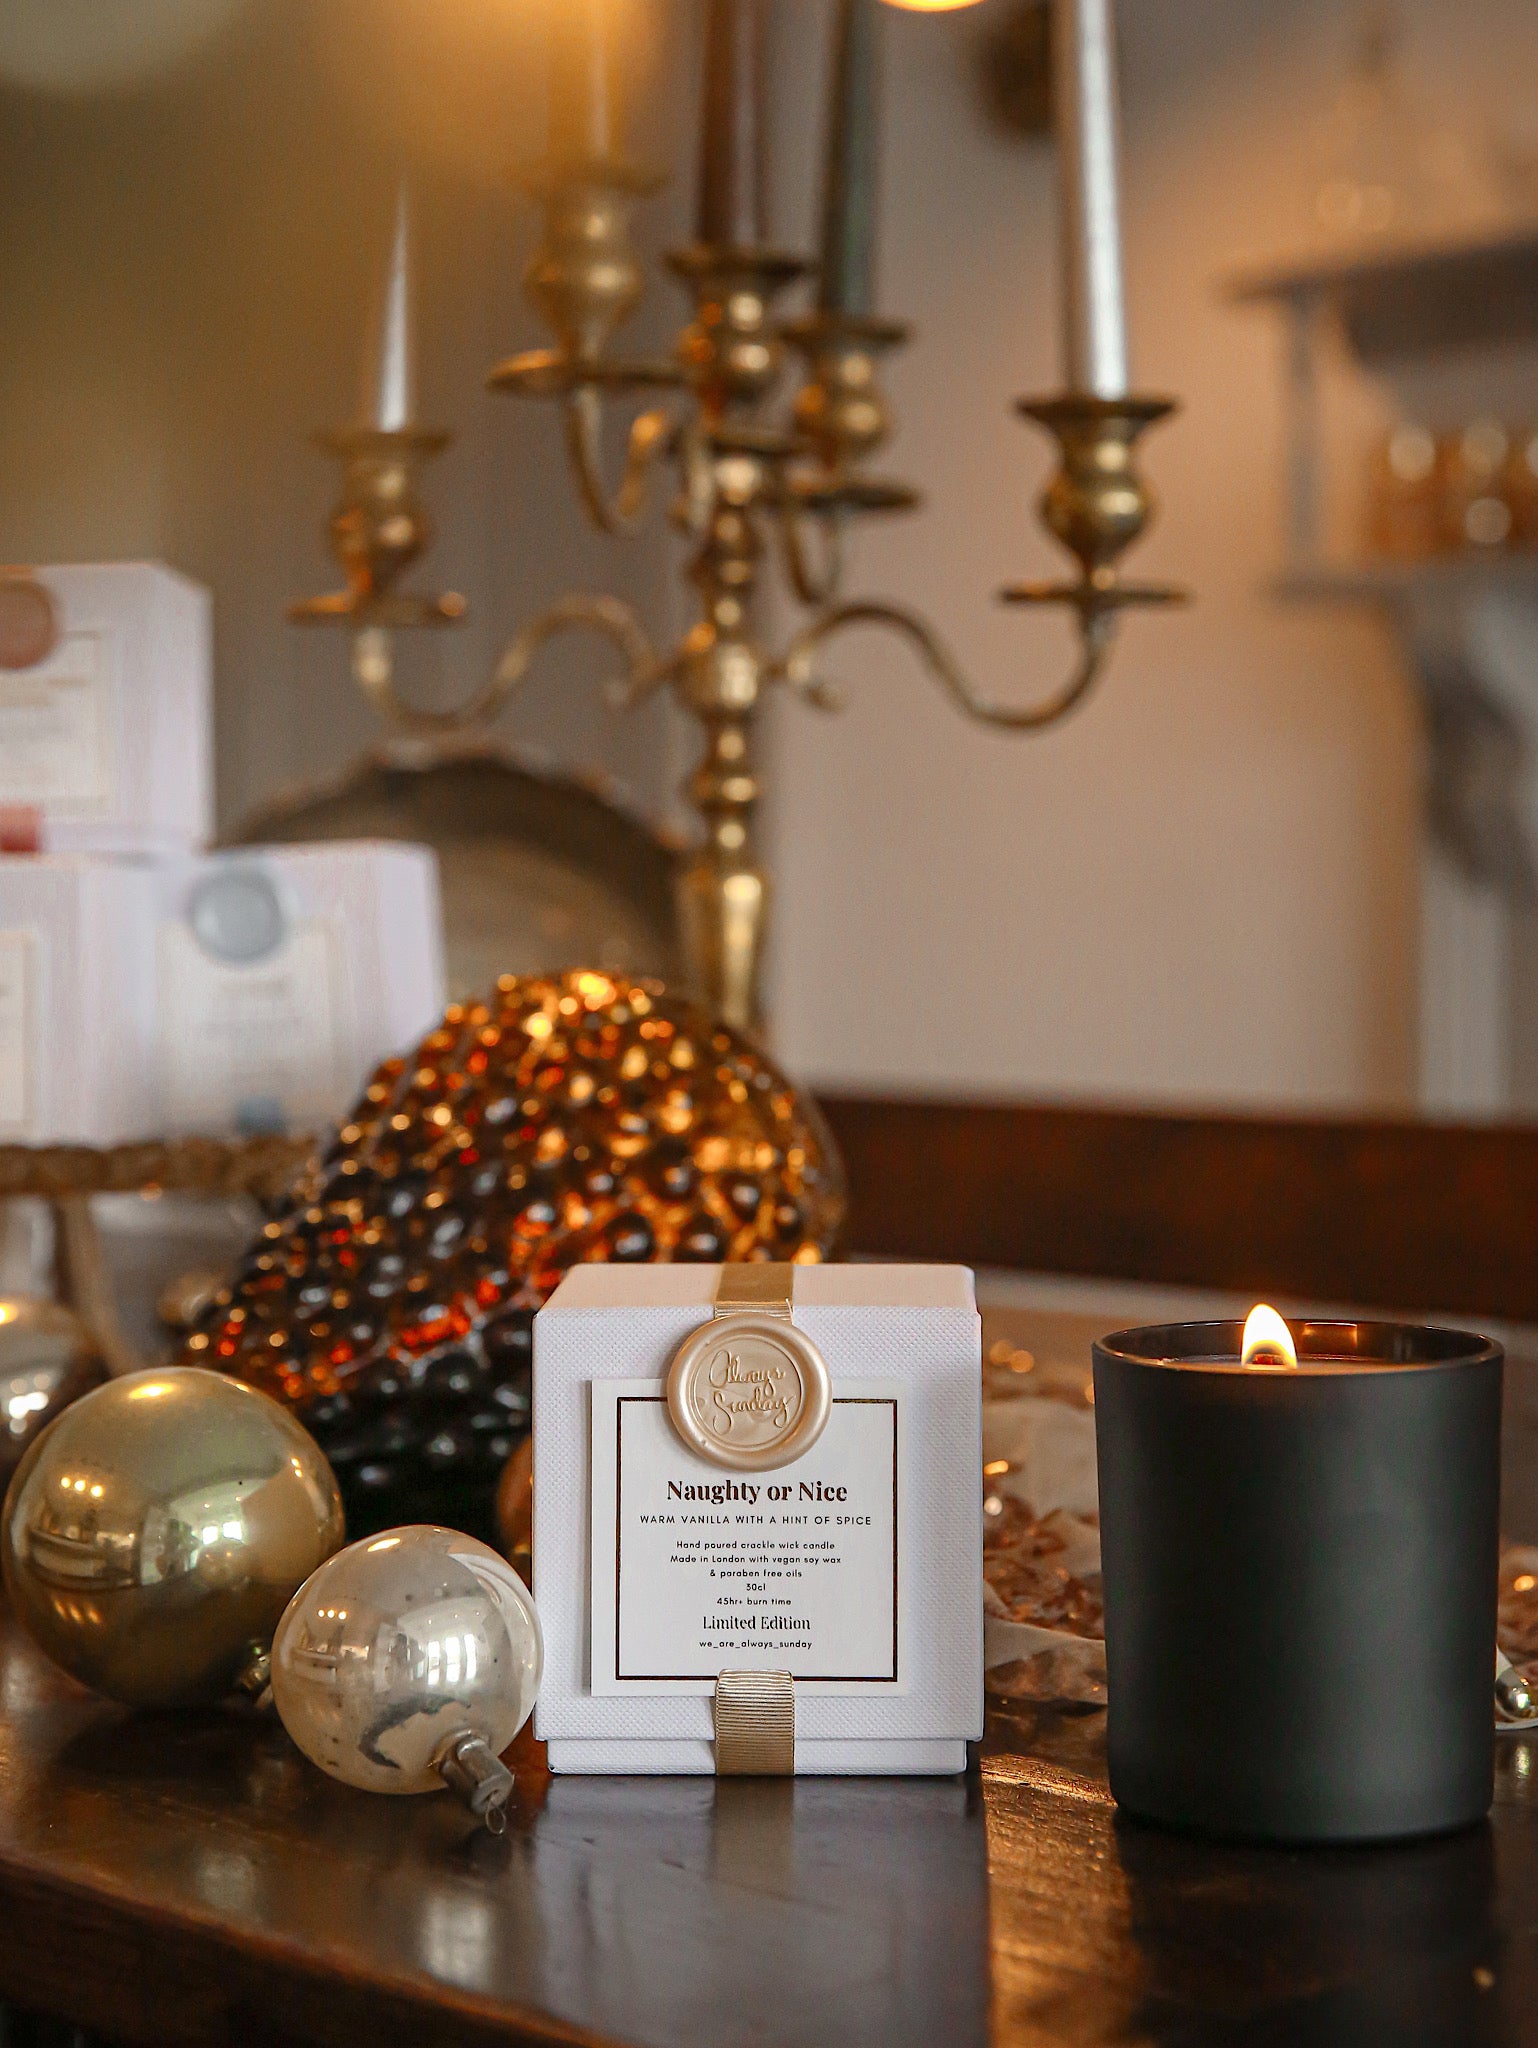 Naughty or Nice Limited Edition Candle by Always Sunday